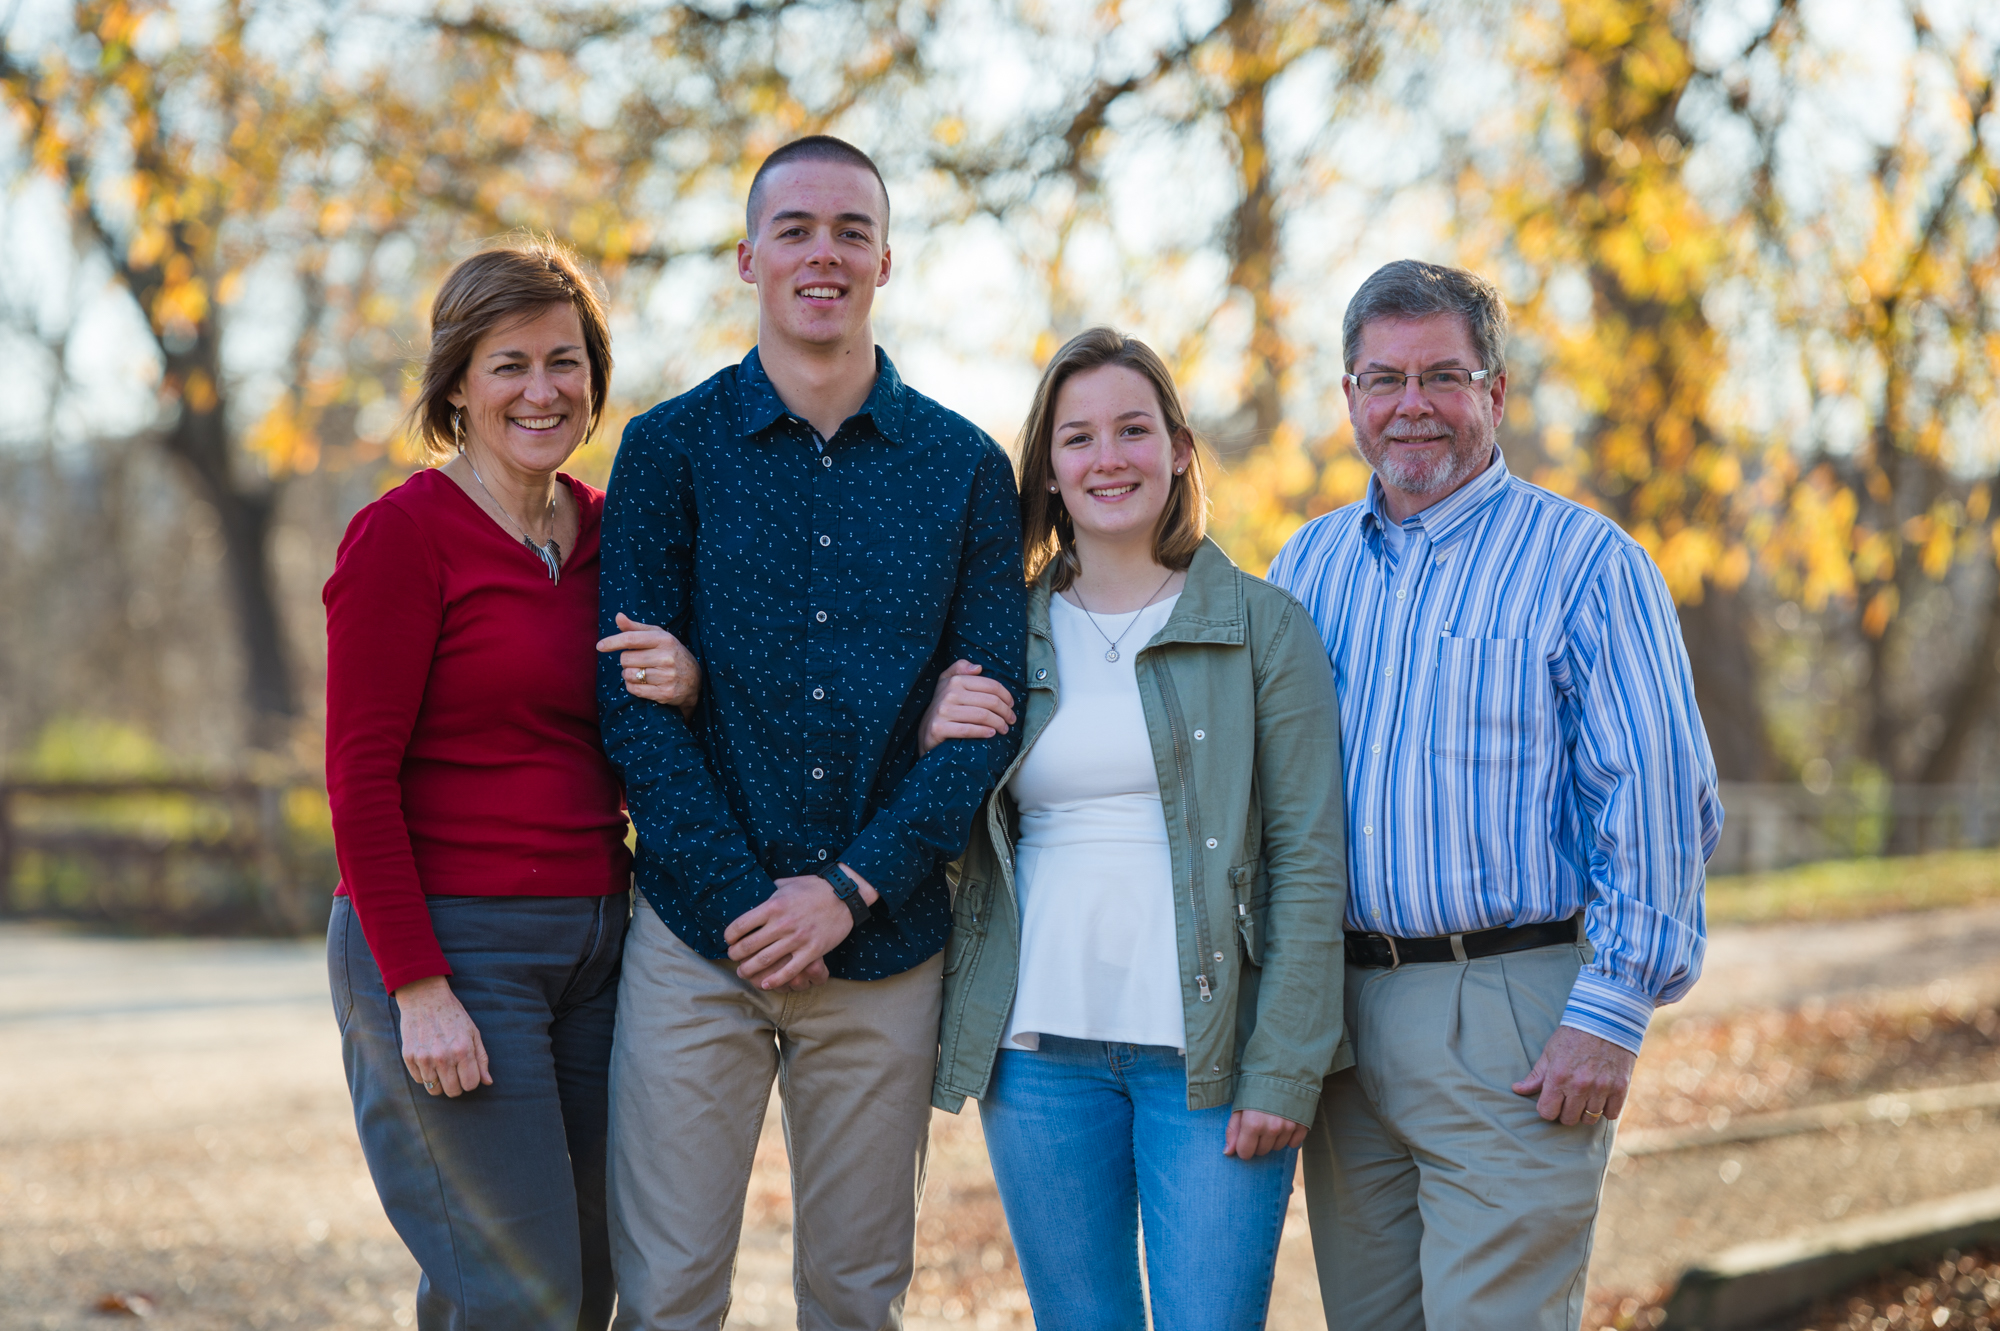 A husband and wife stand arm in arm with their grown children amidst a beautiful fall backdrop for a family photo